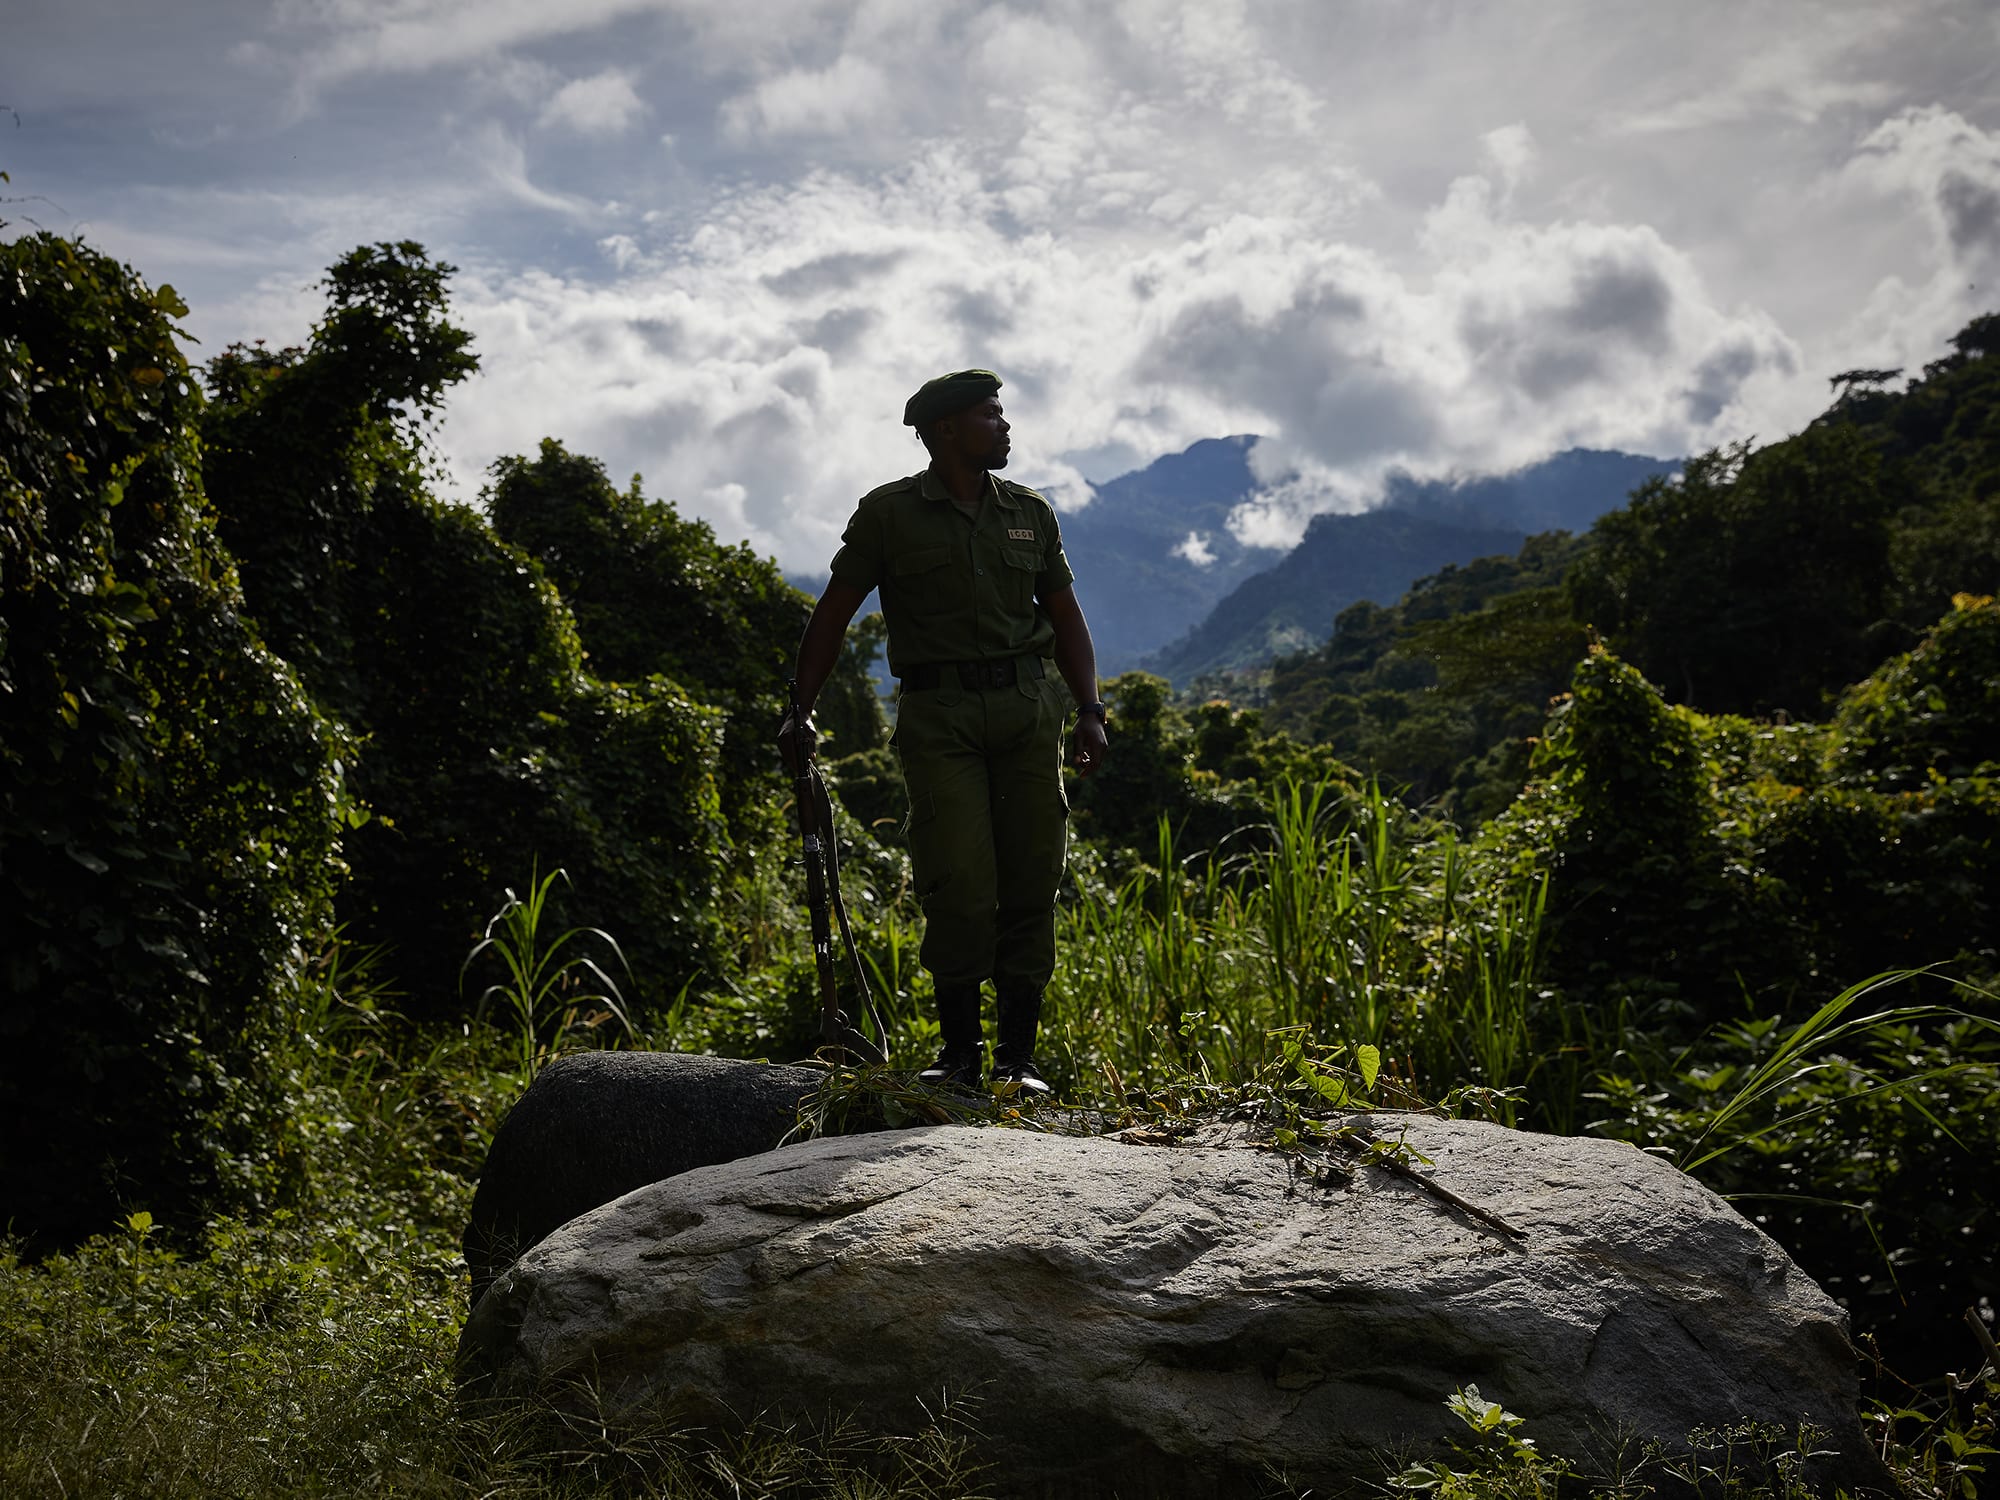 A Ranger of the Park posing with the tropical rainforest in the background